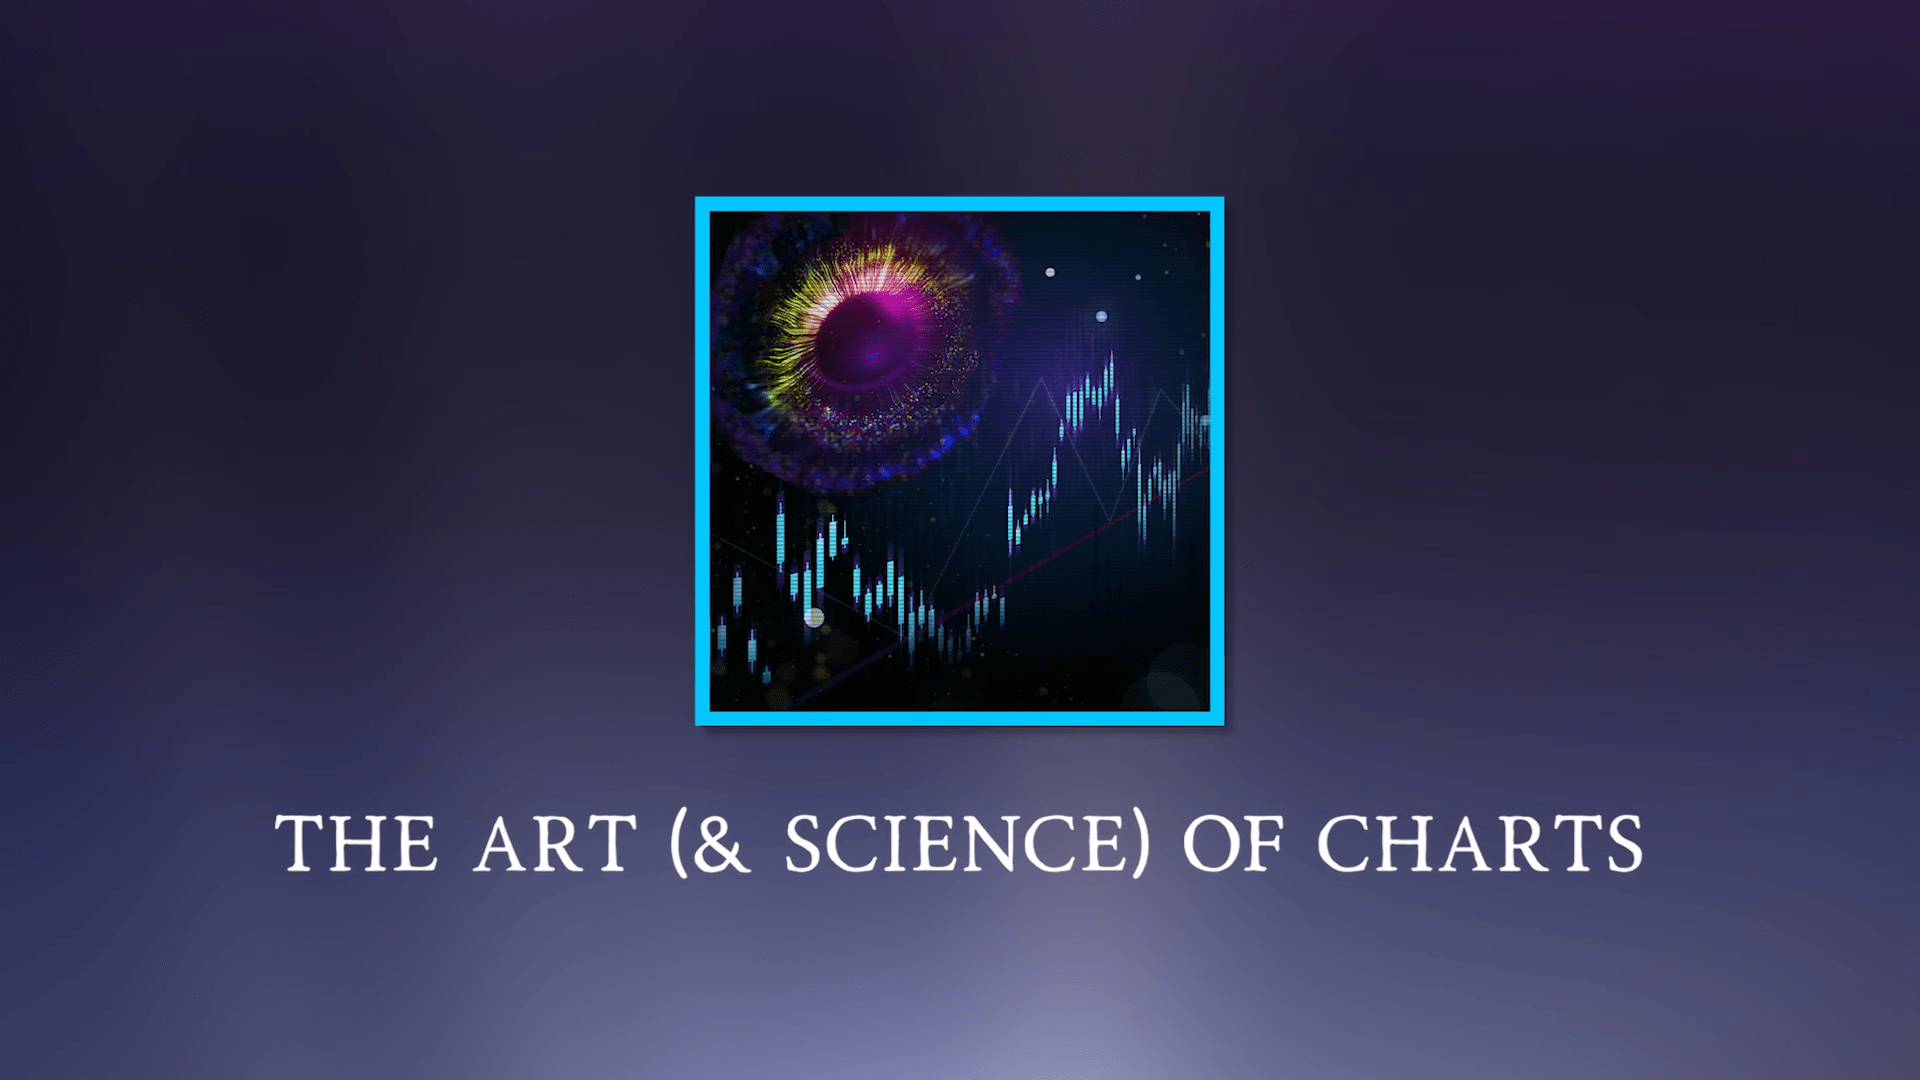 The Art (& Science) of Charts